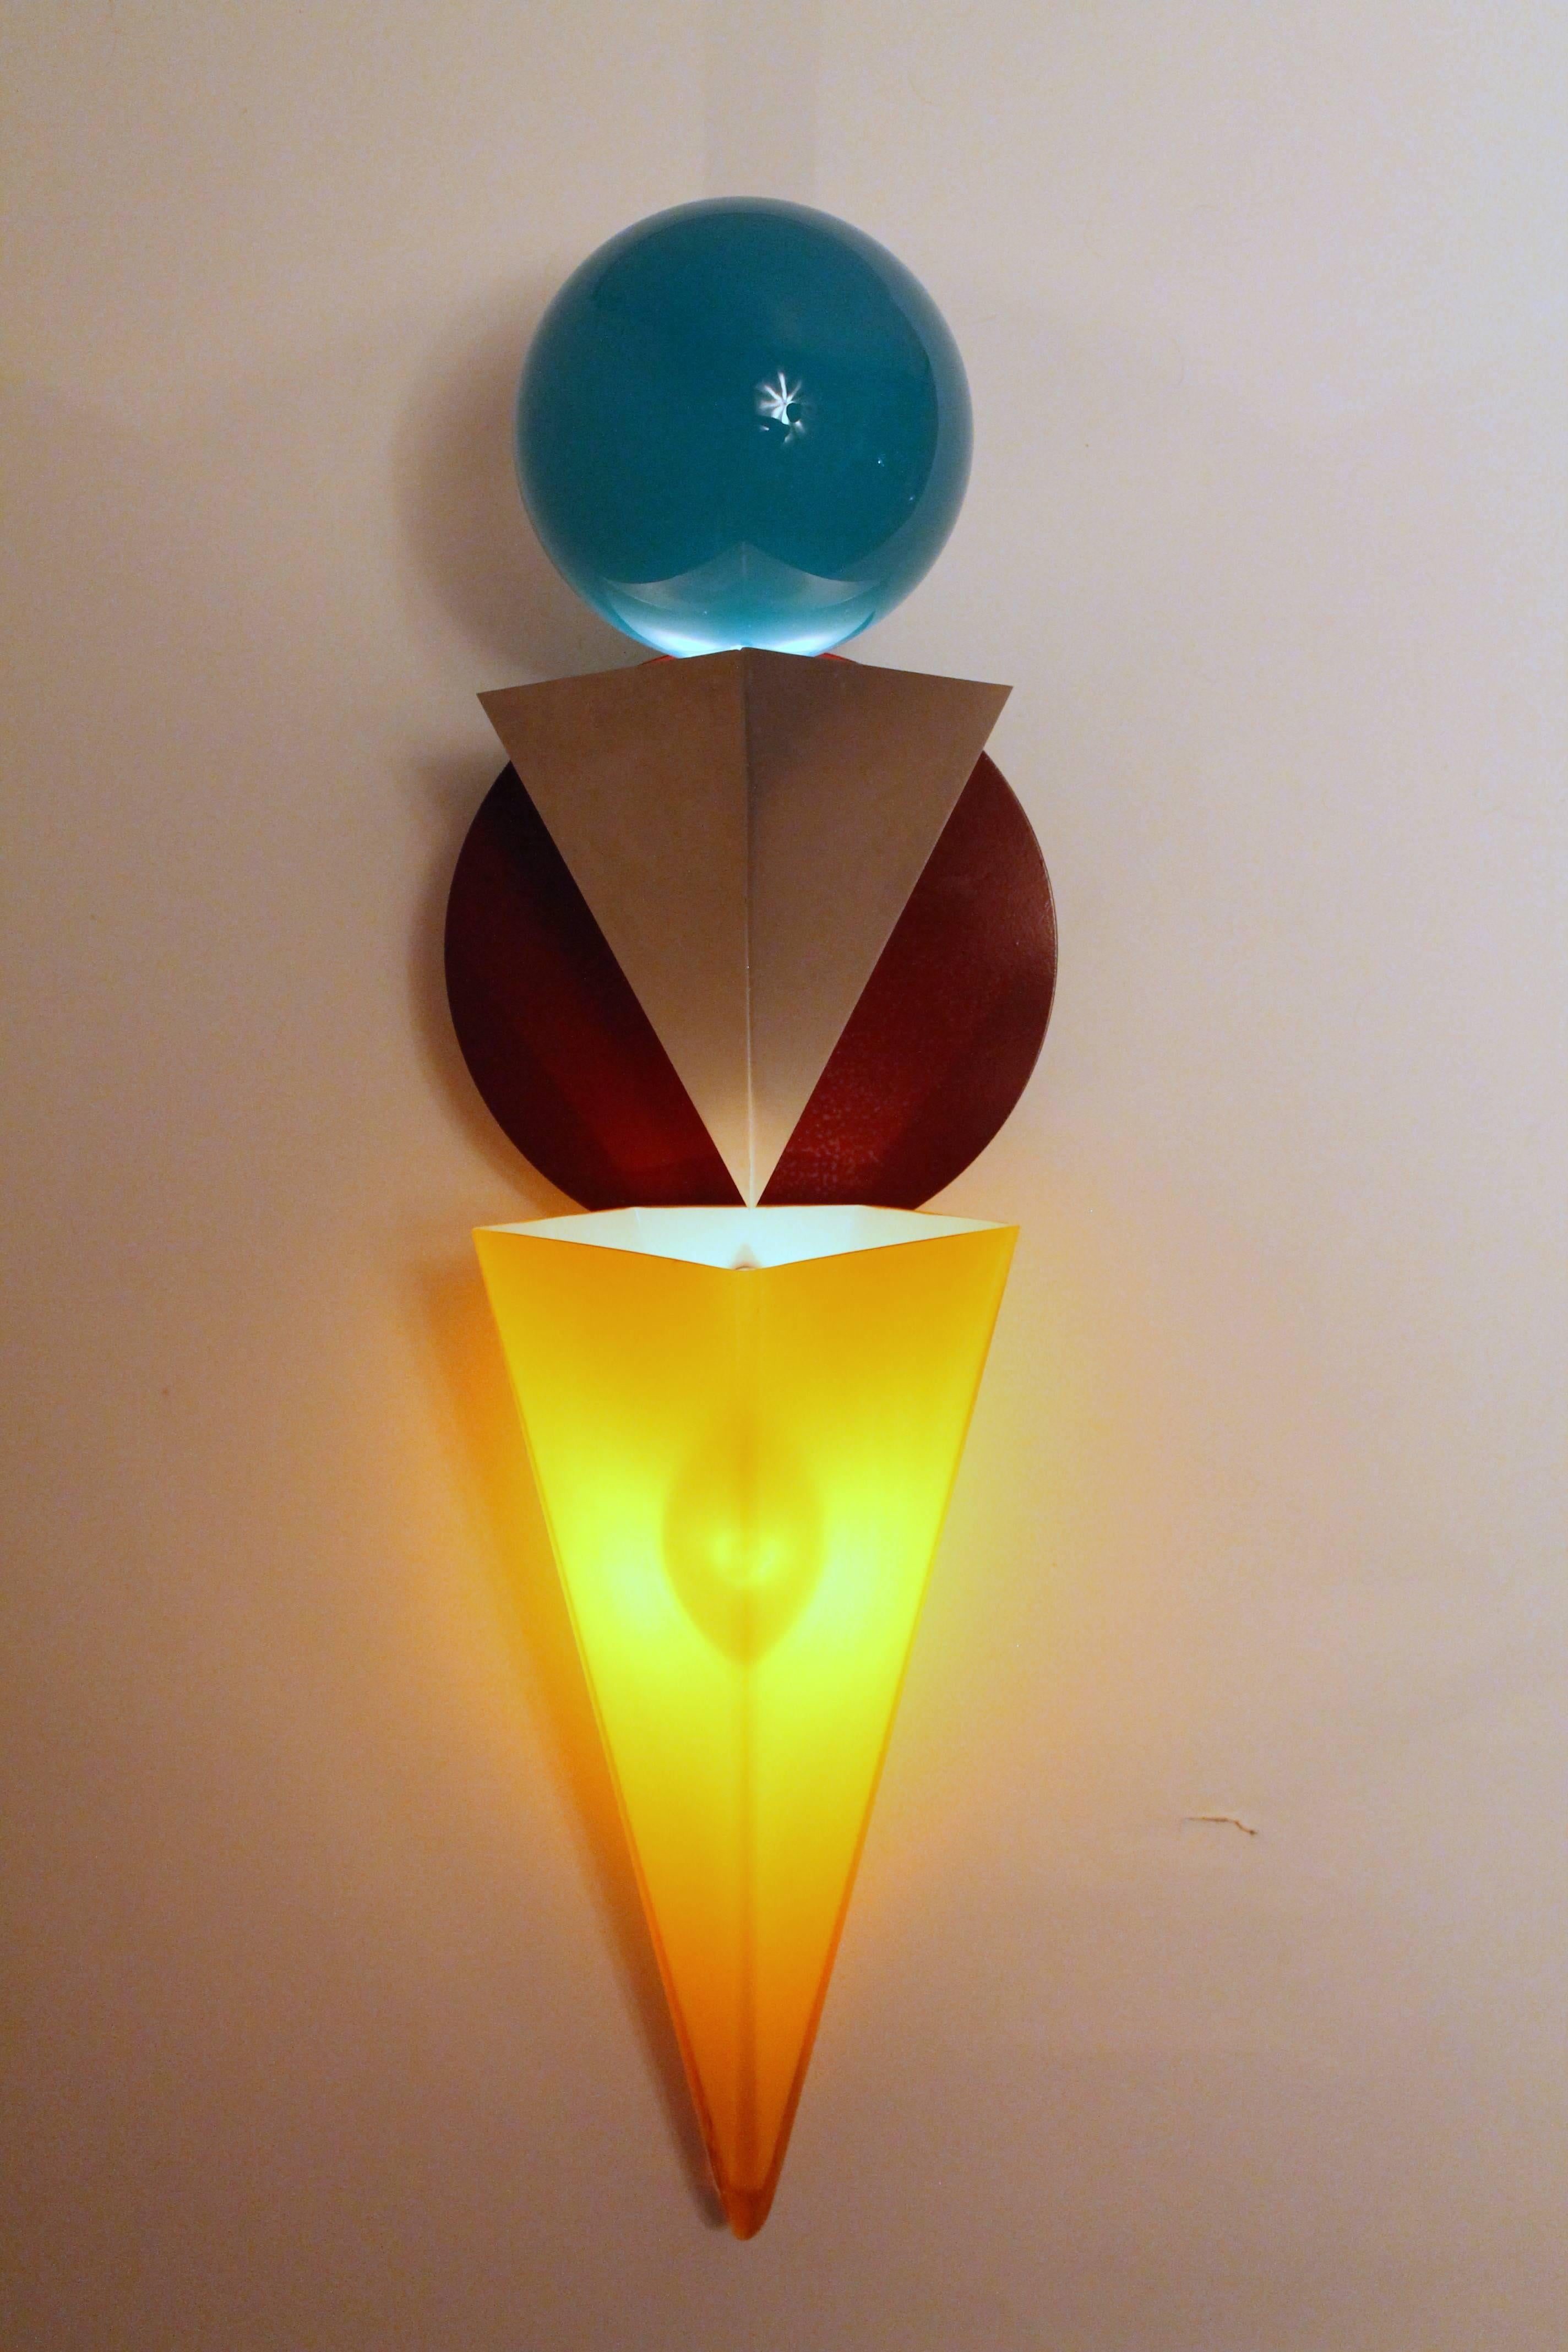 Rare sconce by Foscarini.

Stunning geometrical design with primary colored mouth blown glass.

Two halogen light bulbs.

Designed by Adam T. Tihani and Joseph Mancini.

Measures ; 25 inches high  by 7 inches wide.

One piece out of a set of three.